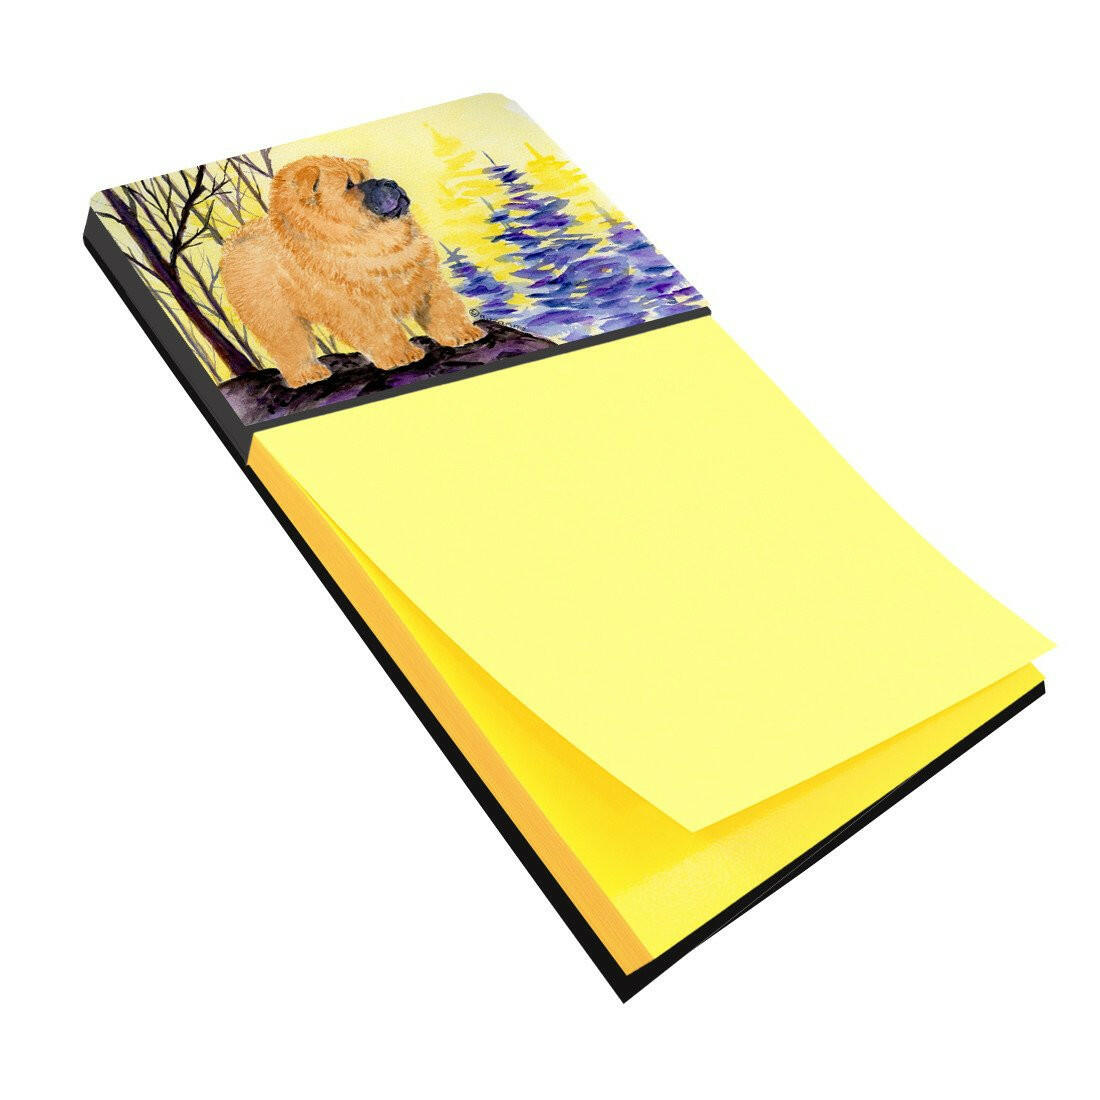 Chow Chow Refiillable Sticky Note Holder or Postit Note Dispenser SS8603SN by Caroline's Treasures